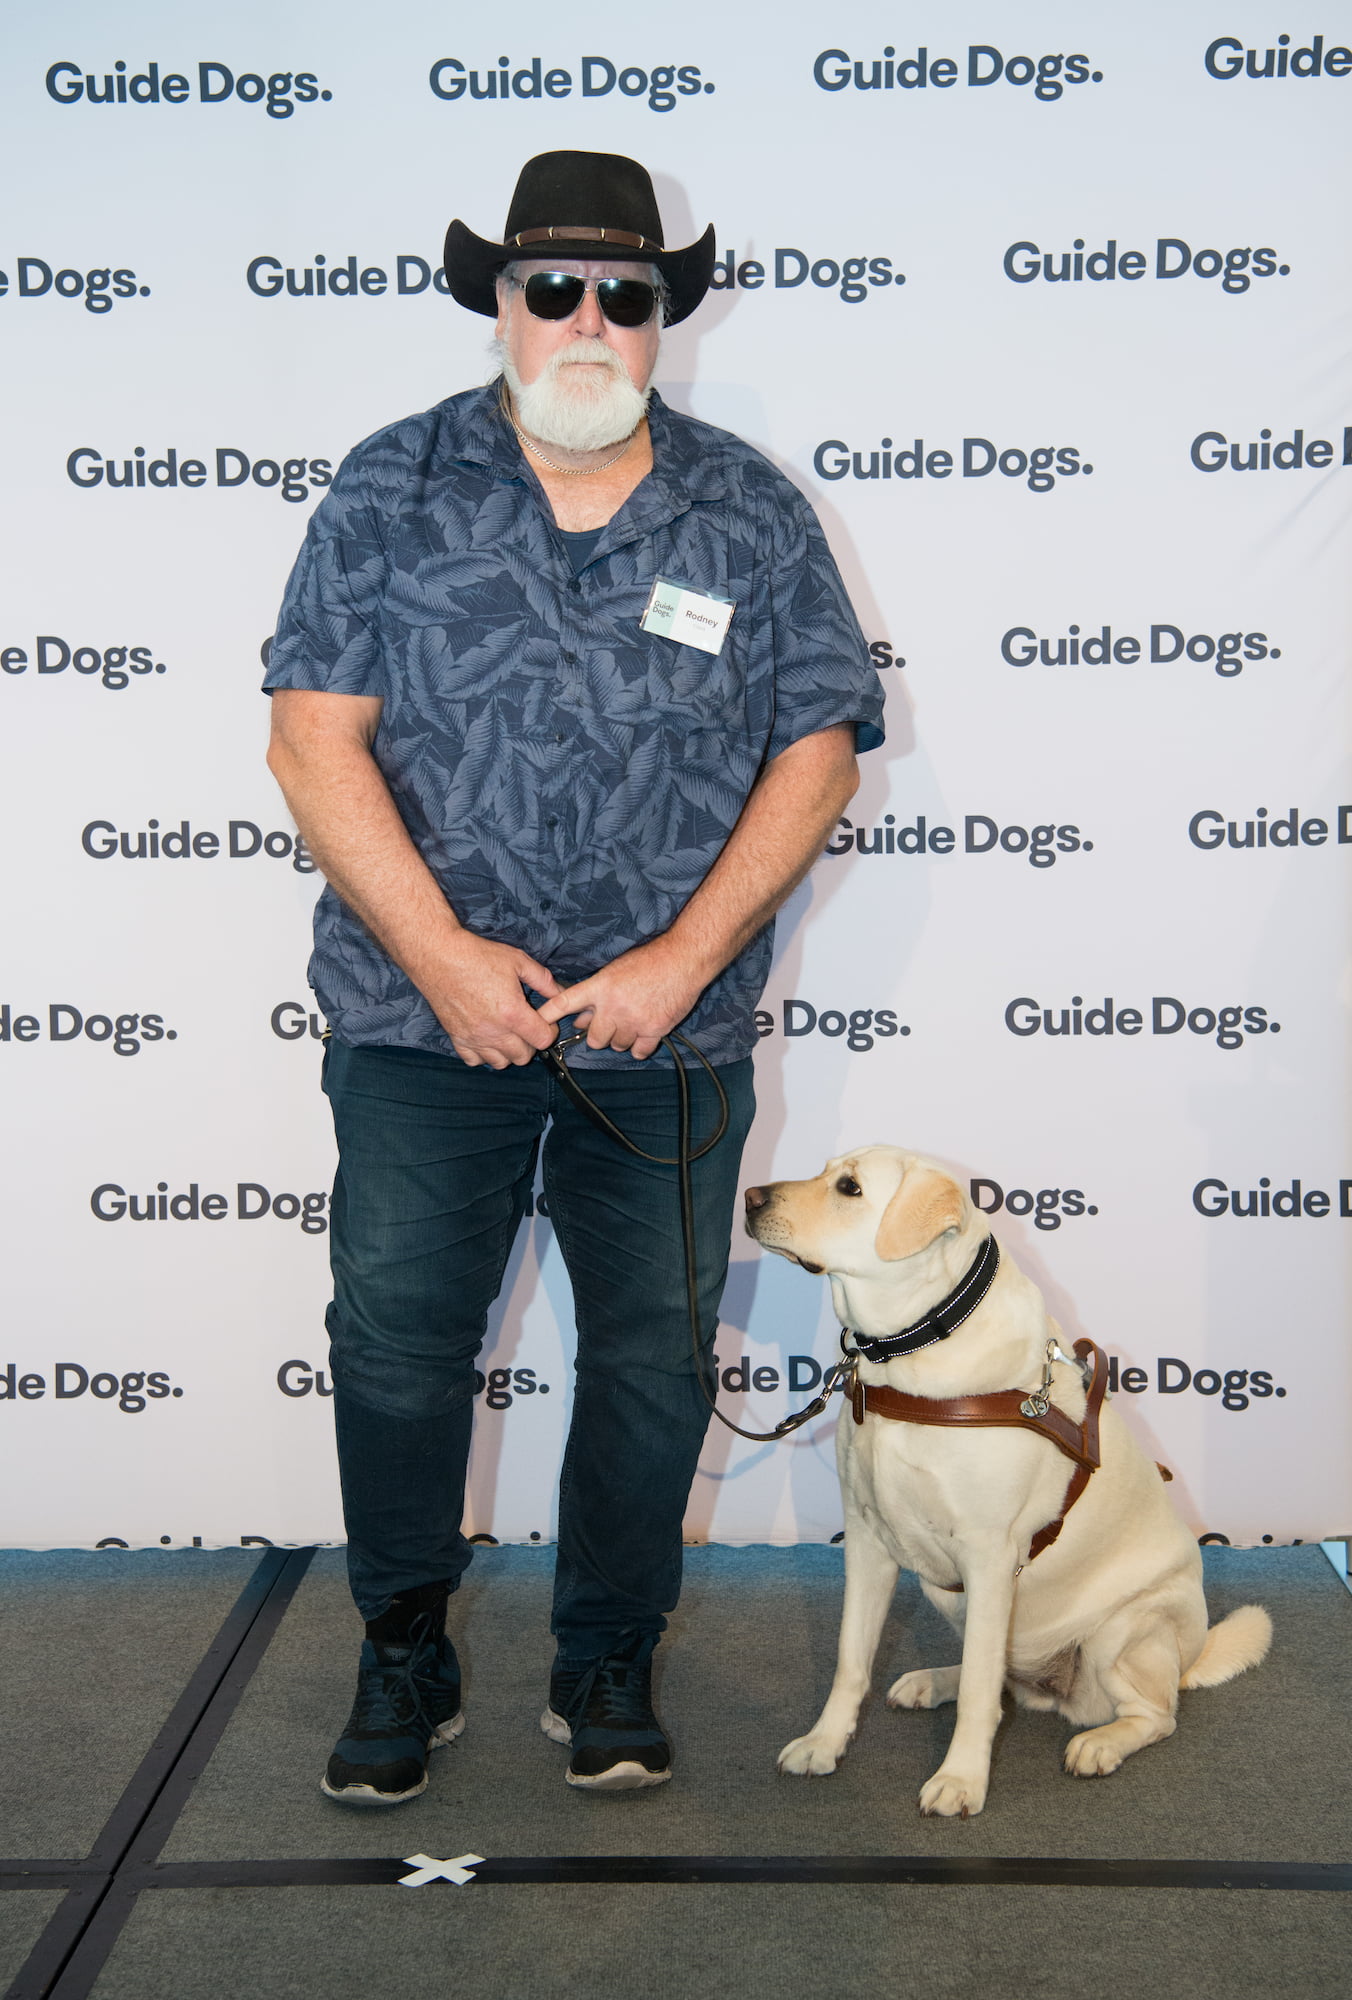 Guide Dogs Client Rodney standing on stage with his Guide Dog Kit, a yellow Labrador wearing a harness.